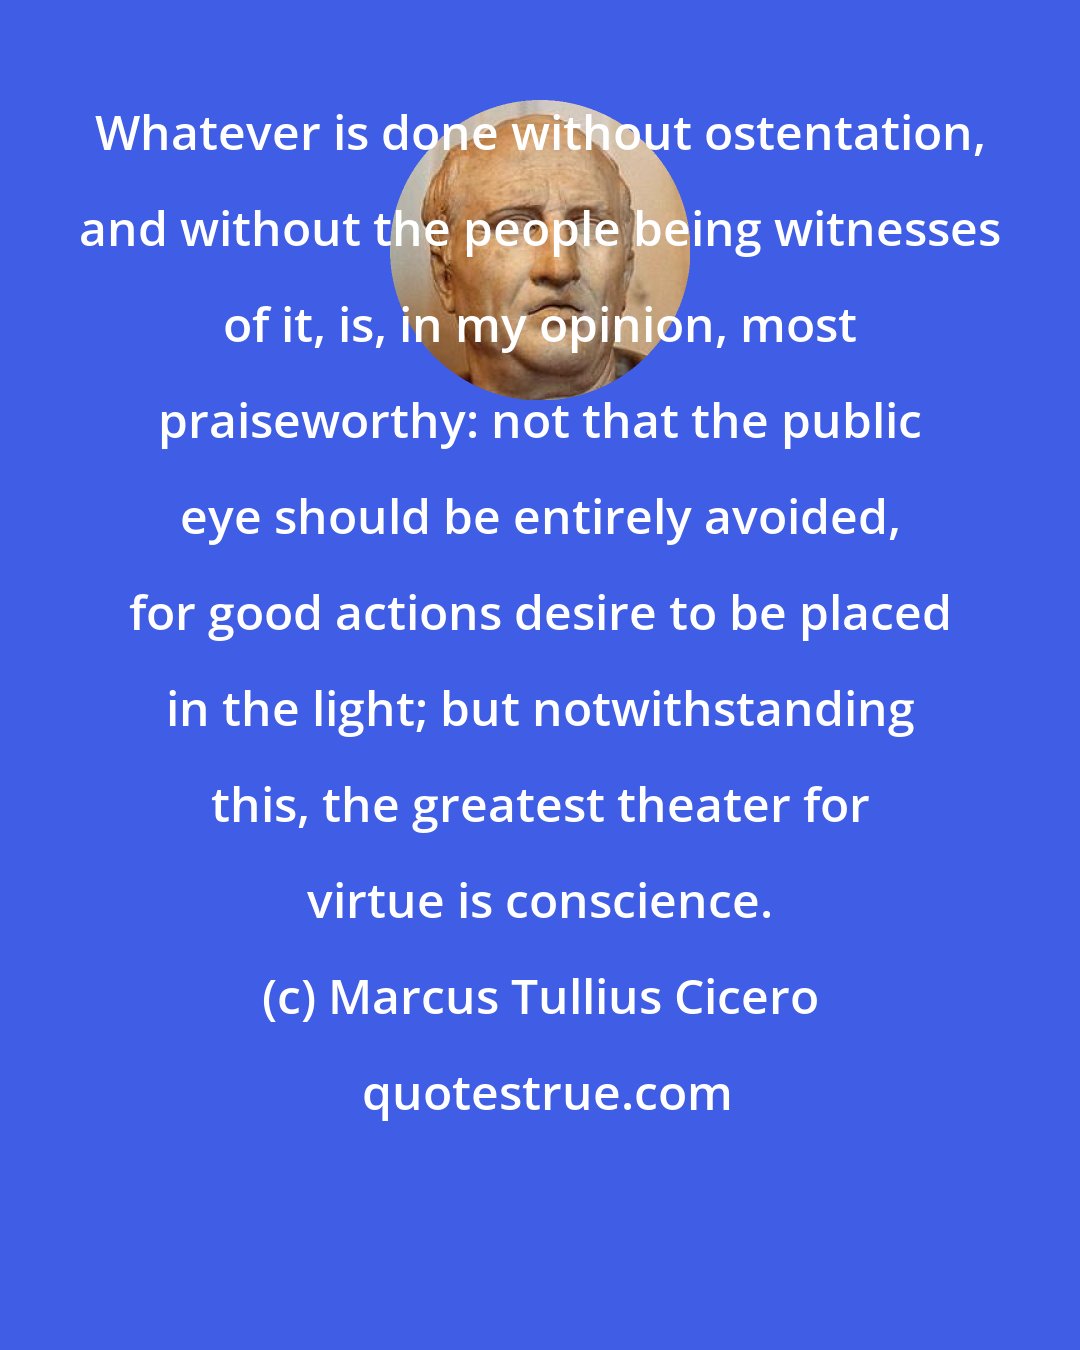 Marcus Tullius Cicero: Whatever is done without ostentation, and without the people being witnesses of it, is, in my opinion, most praiseworthy: not that the public eye should be entirely avoided, for good actions desire to be placed in the light; but notwithstanding this, the greatest theater for virtue is conscience.